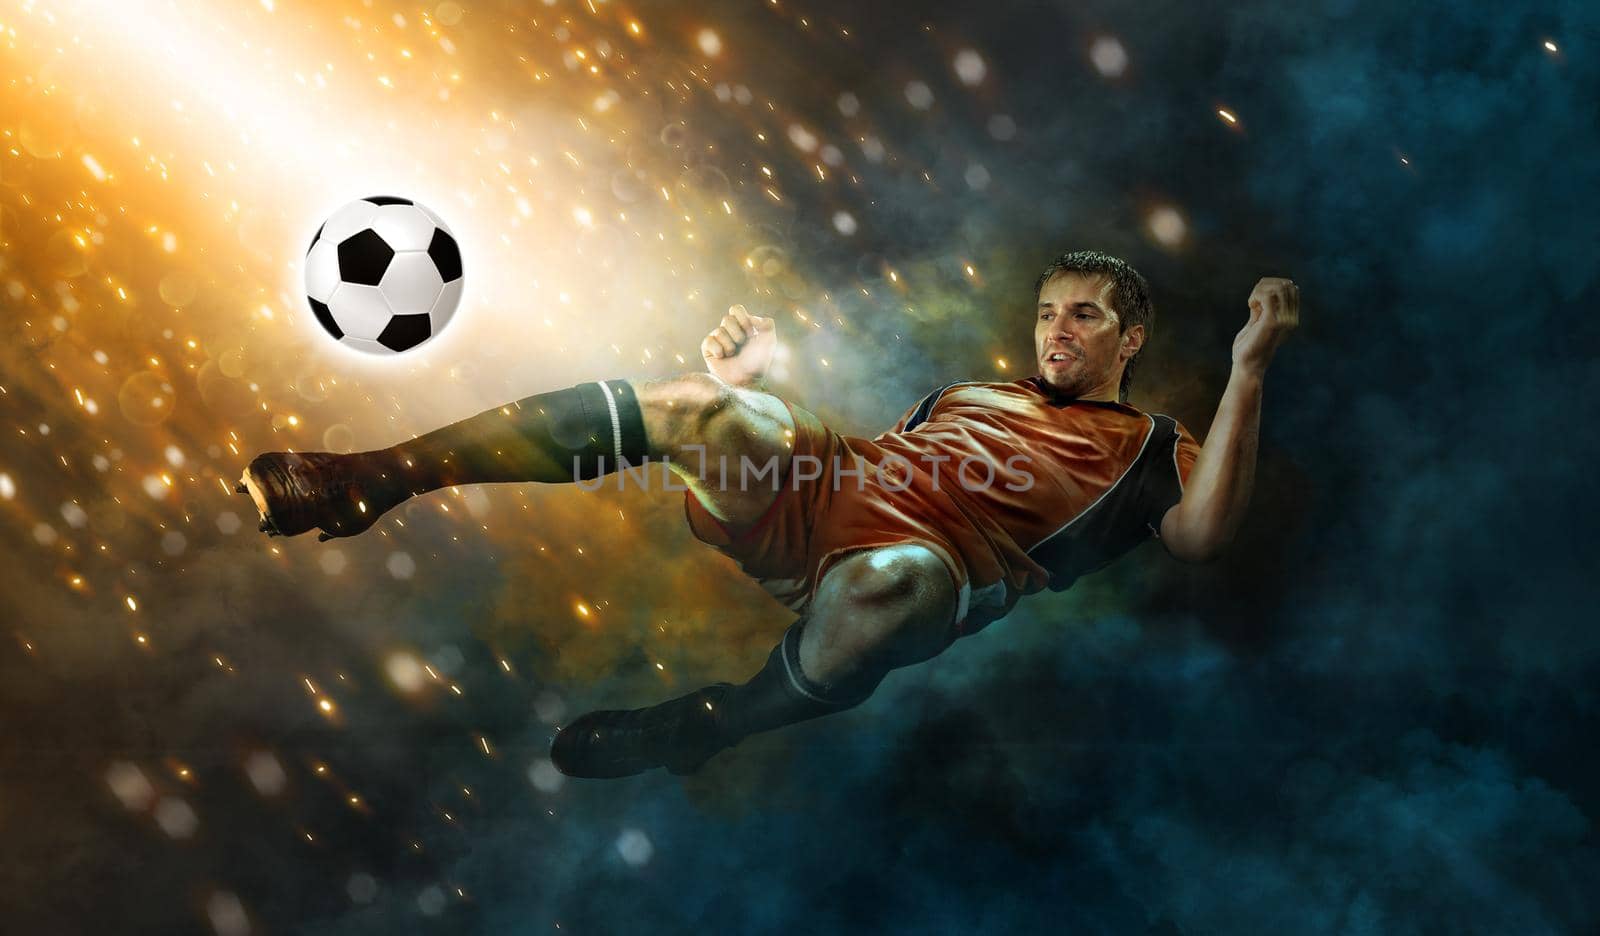 Football player. Soccer player. Man in football sportswear at the game in action with ball. Sport concept. by MikeOrlov